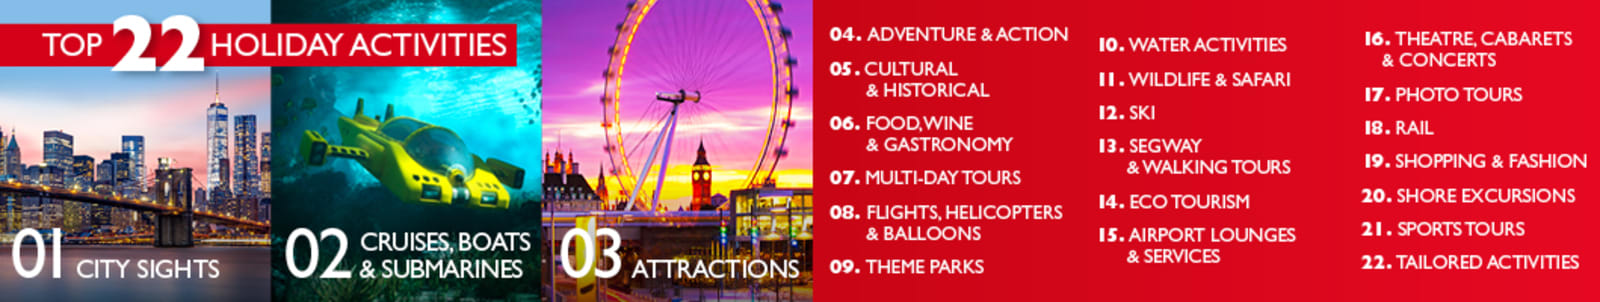 Our top 22 holiday activities based on bookings listed out